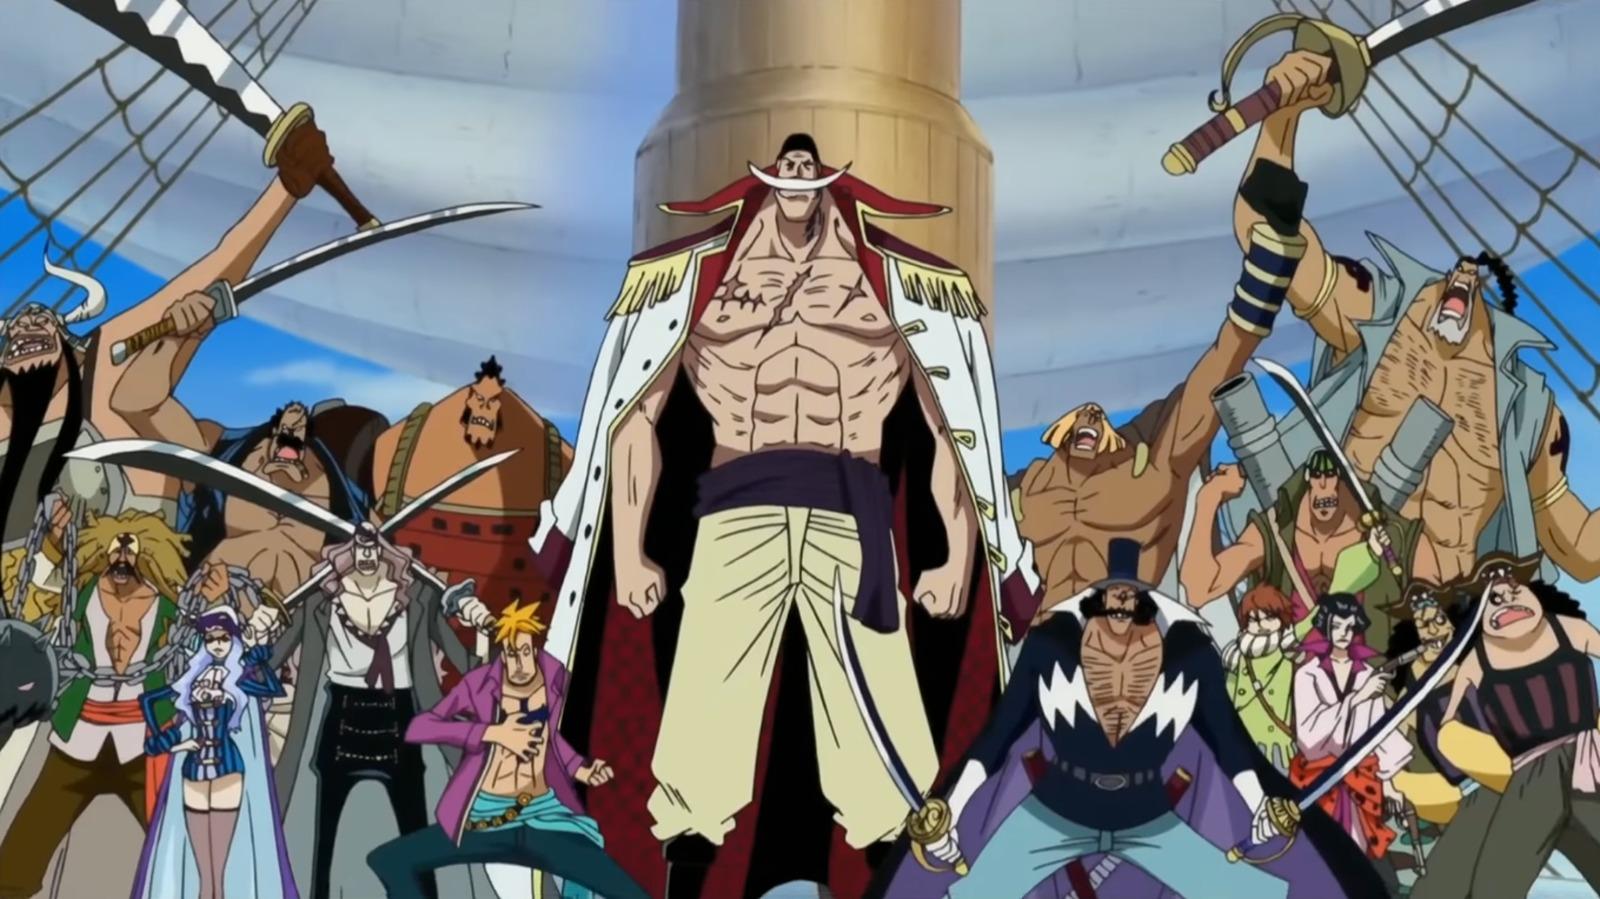 An image of Whitebeard Pirates in Marineford Arc of One Piece